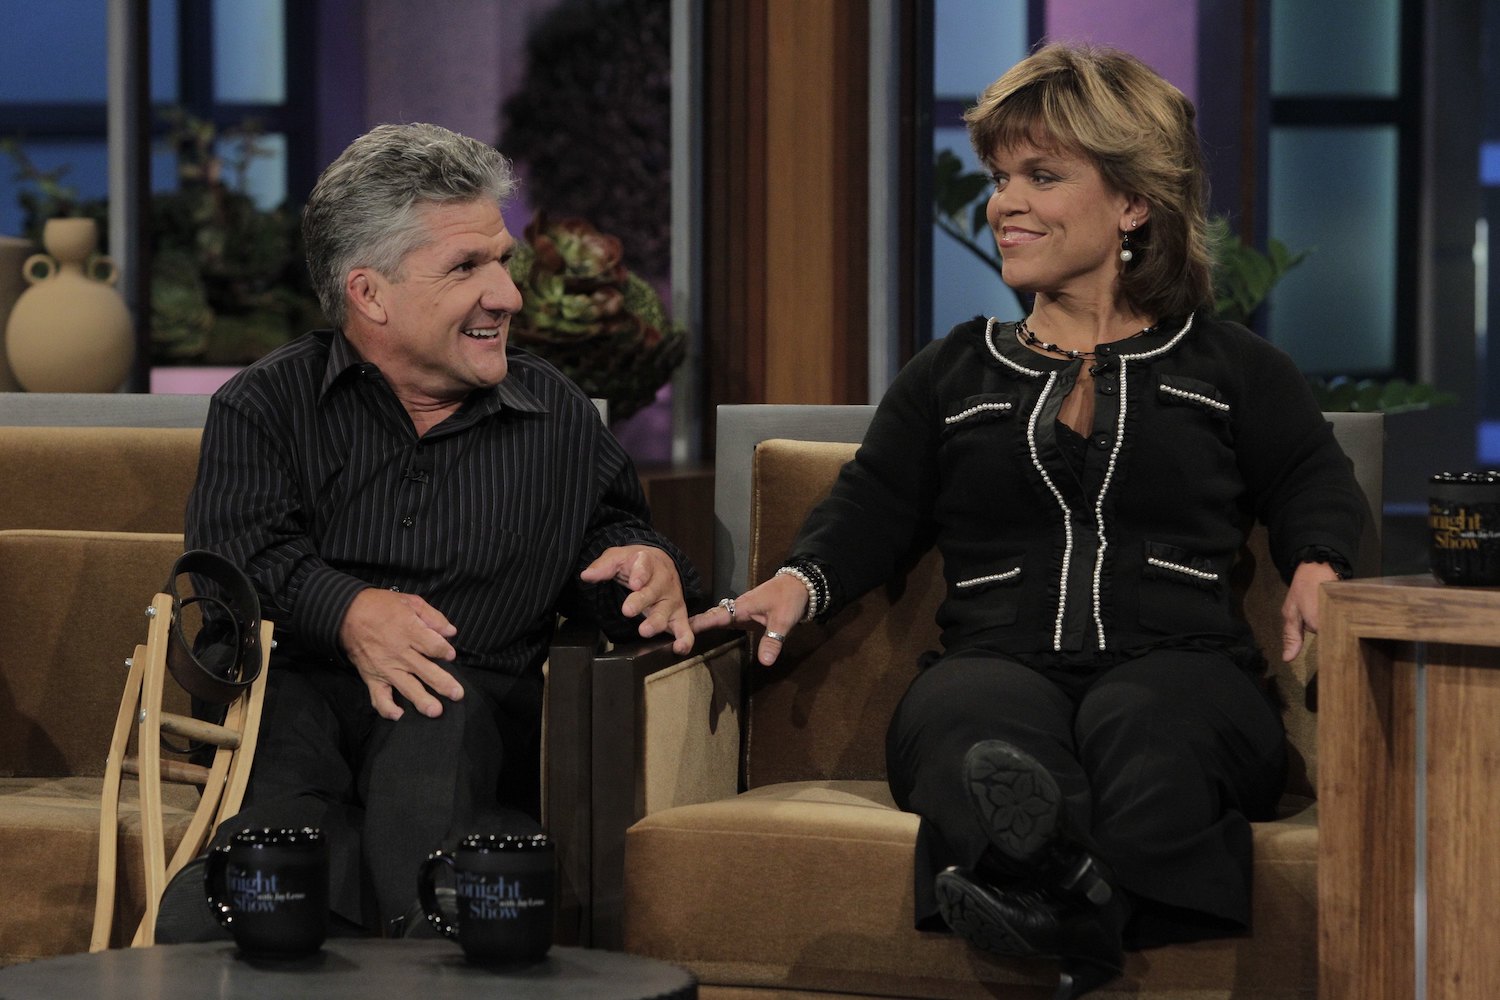 'Little People, Big World' stars Matt and Amy Roloff holding hands and smiling during an interview